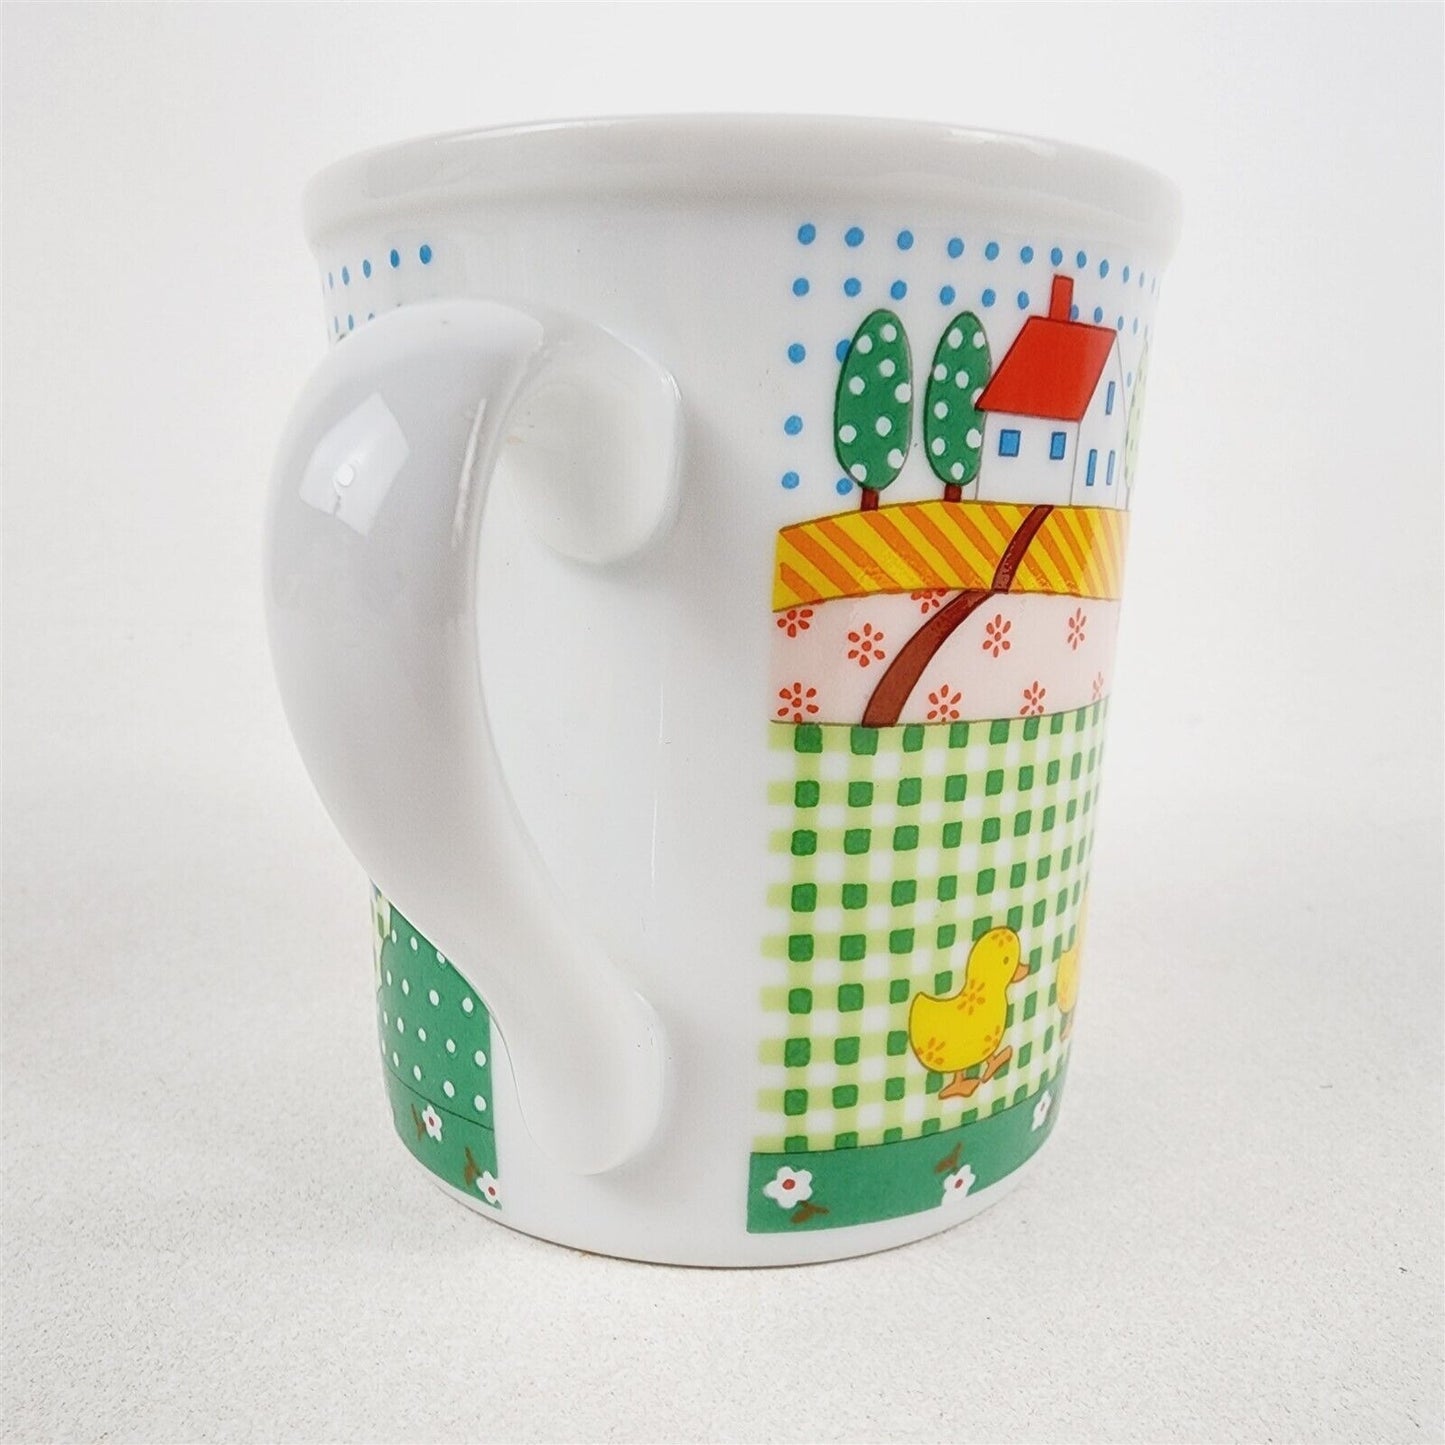 Vintage Coffee Cup Mug Country Quilt Ducks Blue Dot - 3 1/2" tall